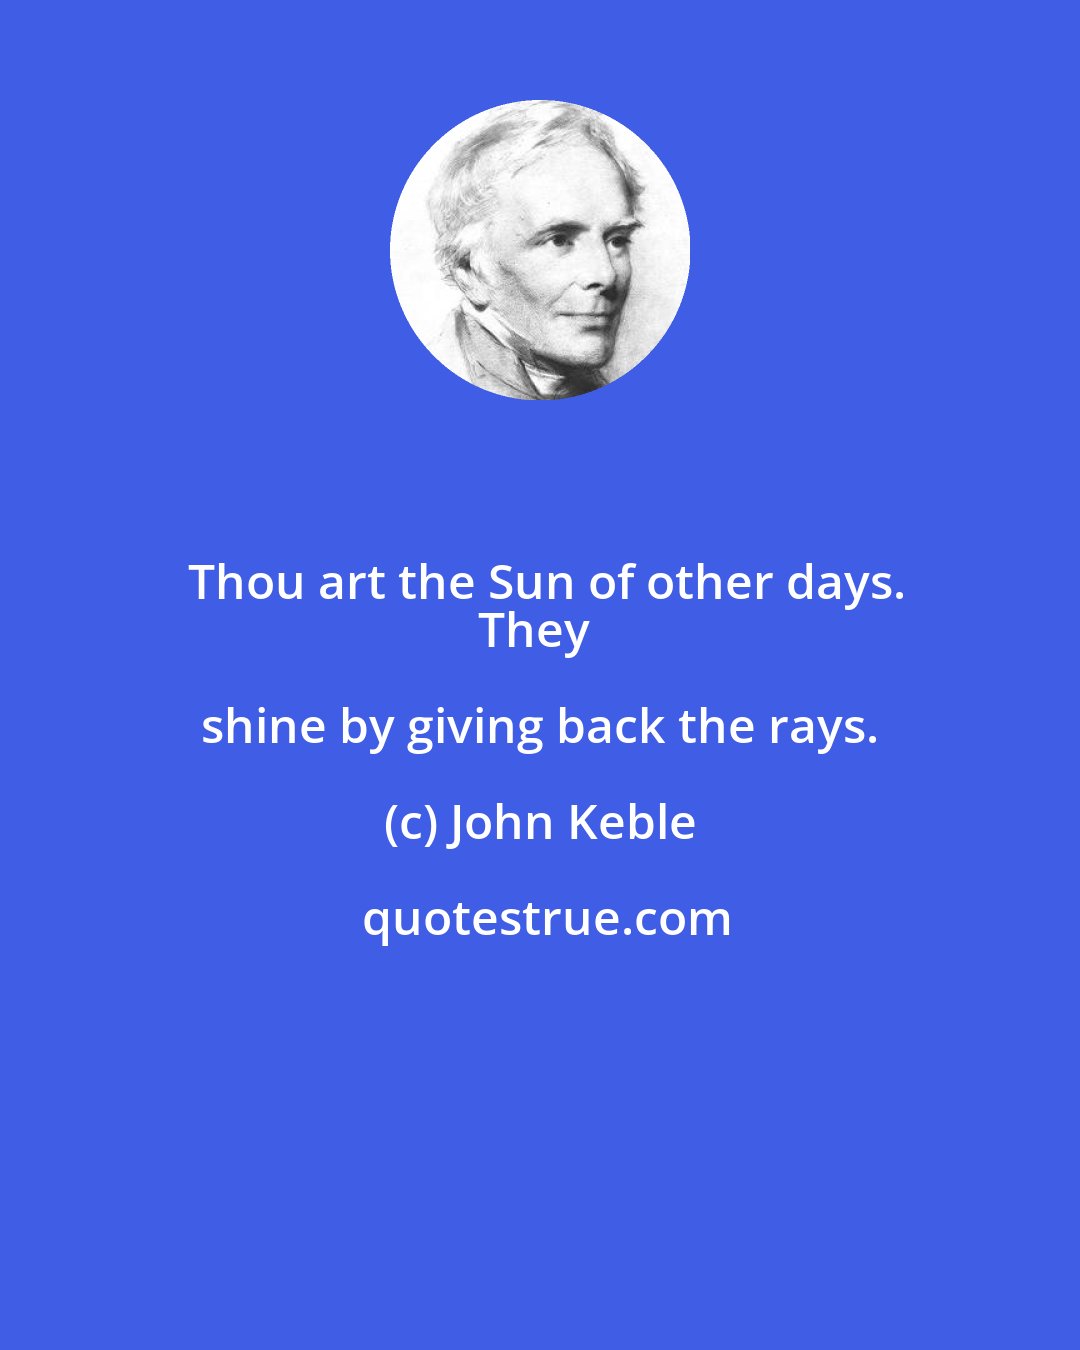 John Keble: Thou art the Sun of other days.
They shine by giving back the rays.